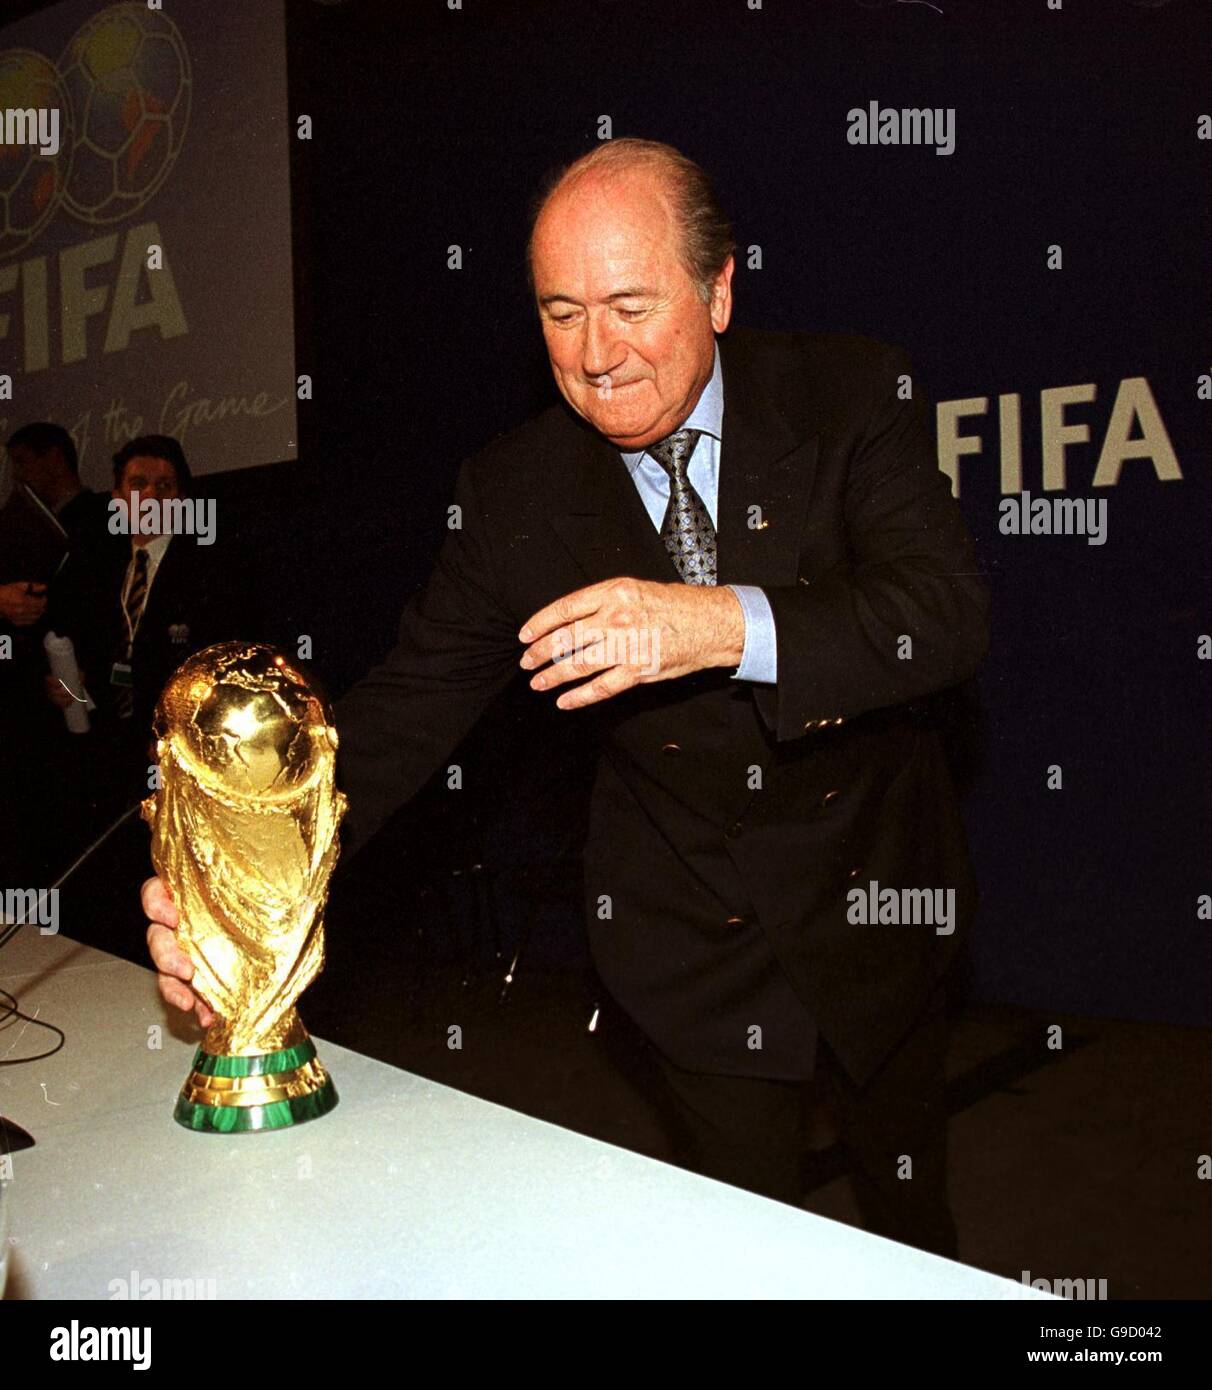 Soccer - FIFA 2006 World Cup - Bidding To Host Tournament. FIFA President Joseph Sepp Blatter with the World Cup Trophy Stock Photo